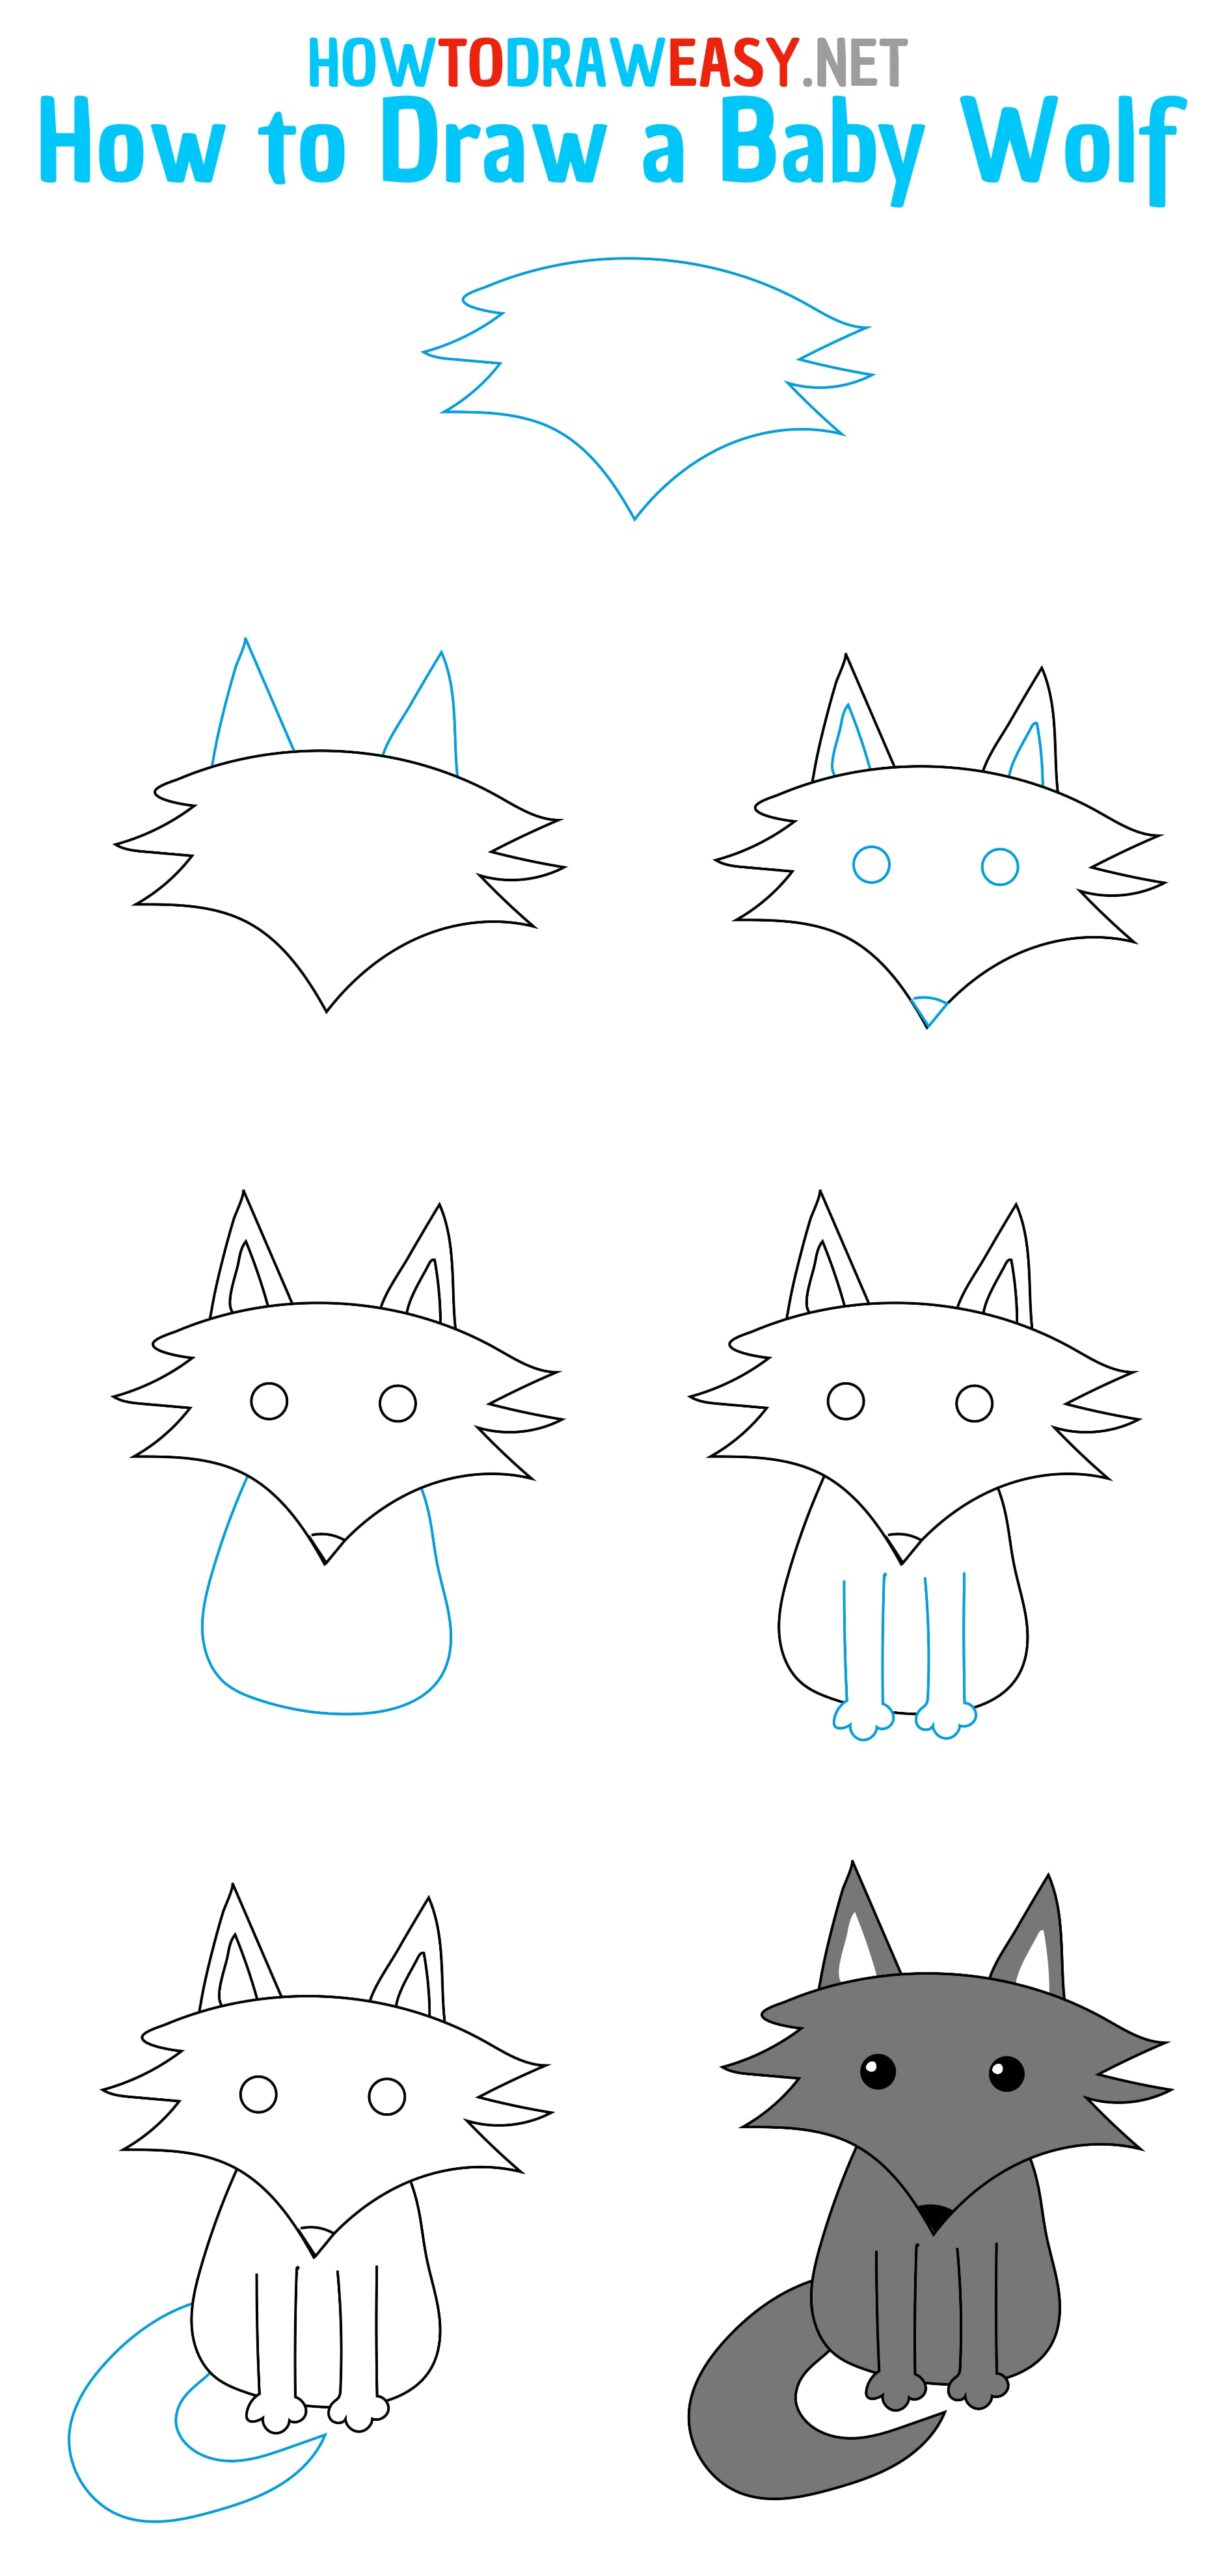 How to Draw a Baby Wolf Step by Step